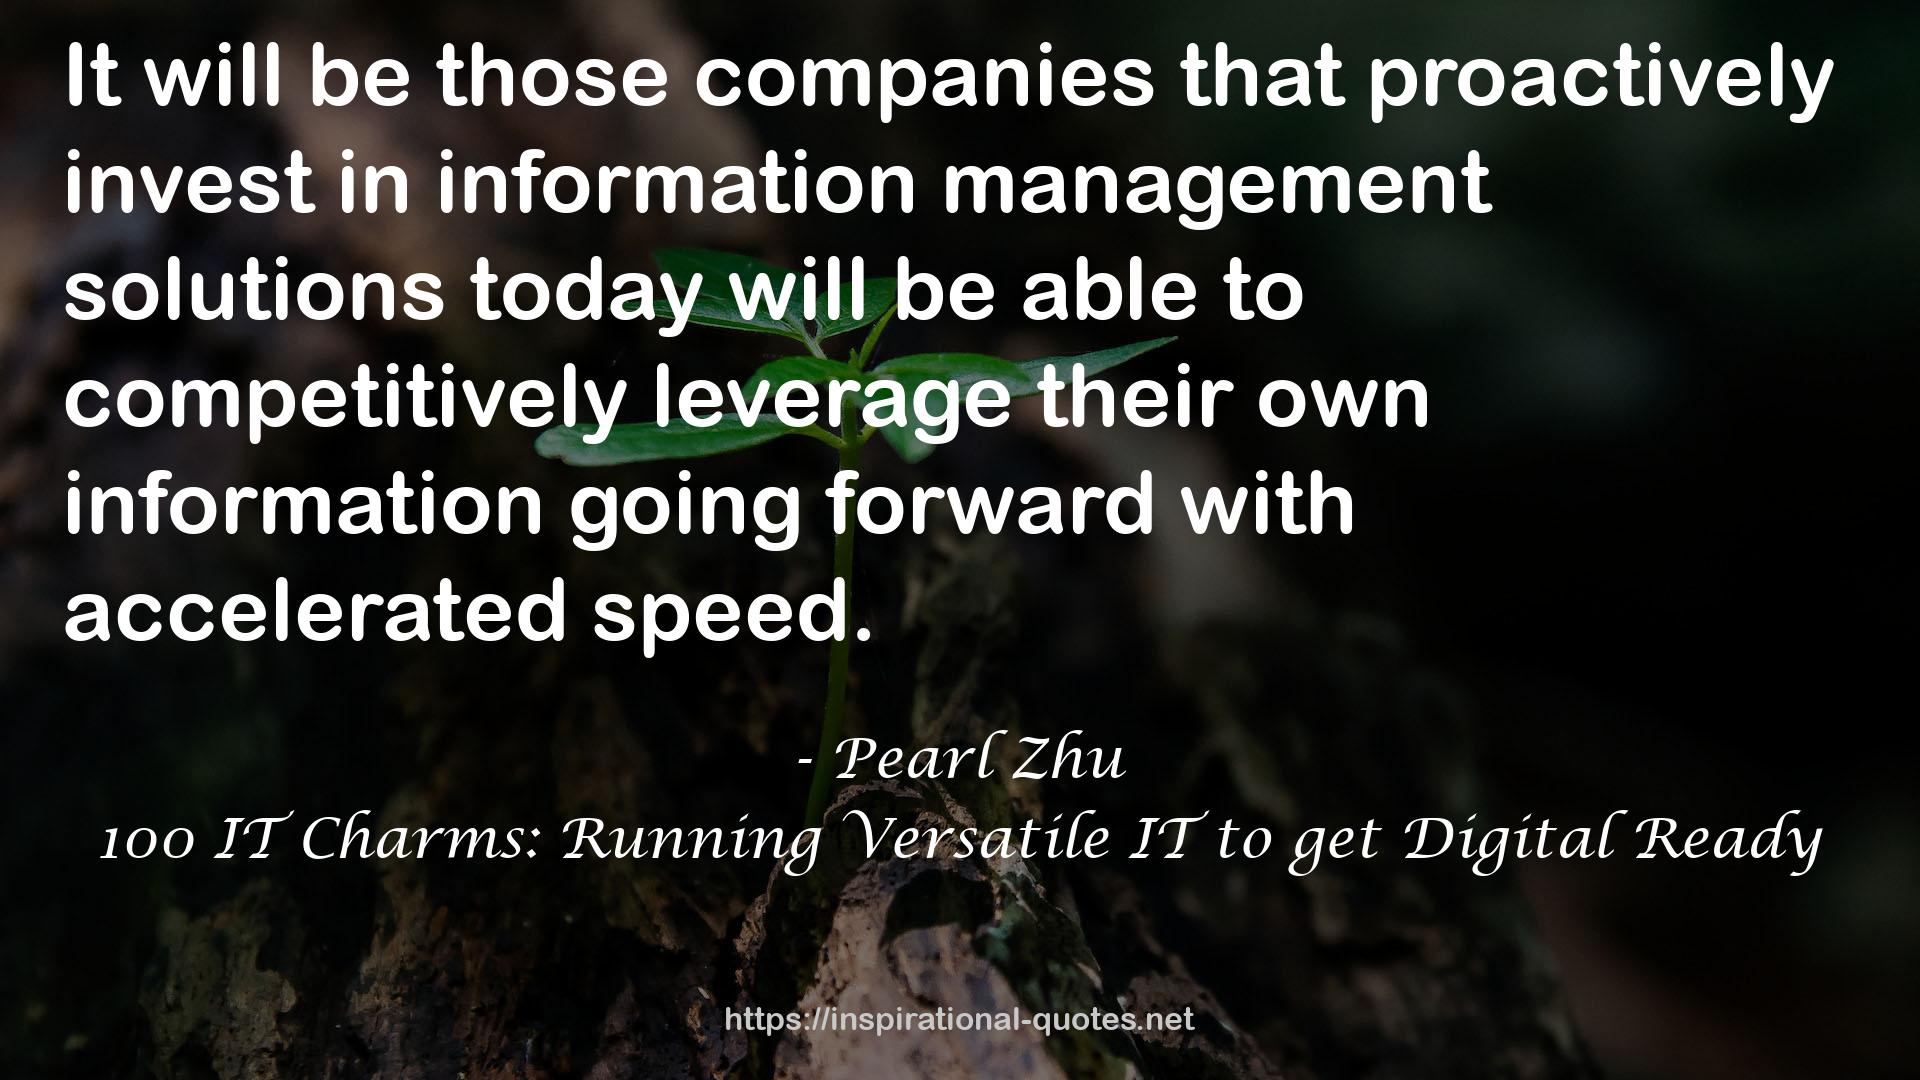 100 IT Charms: Running Versatile IT to get Digital Ready QUOTES